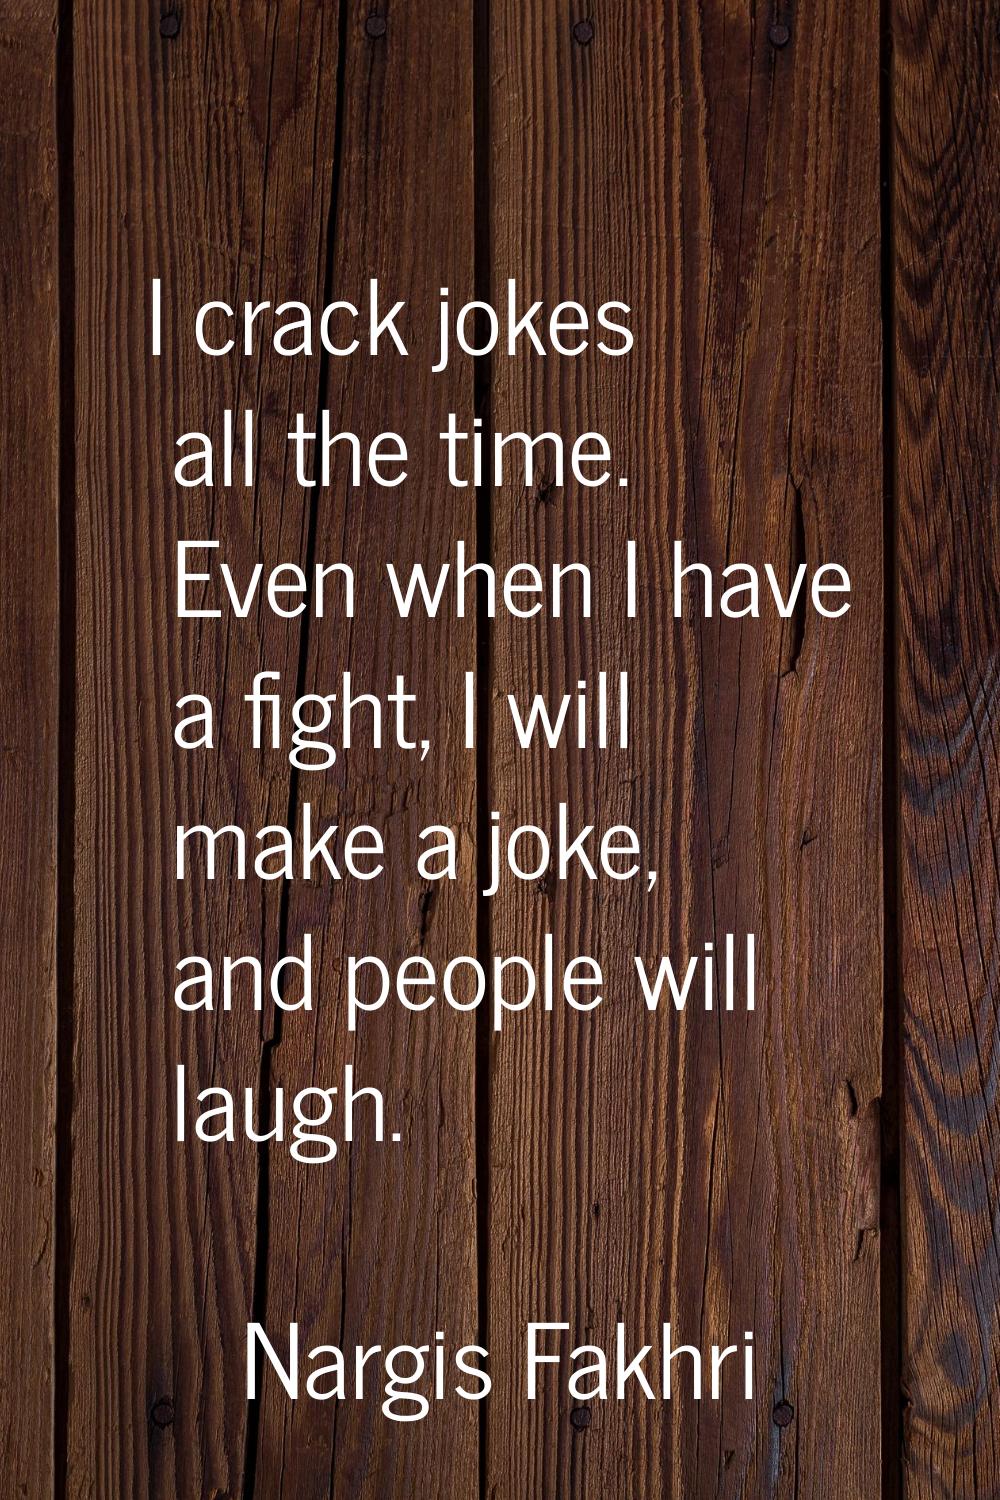 I crack jokes all the time. Even when I have a fight, I will make a joke, and people will laugh.